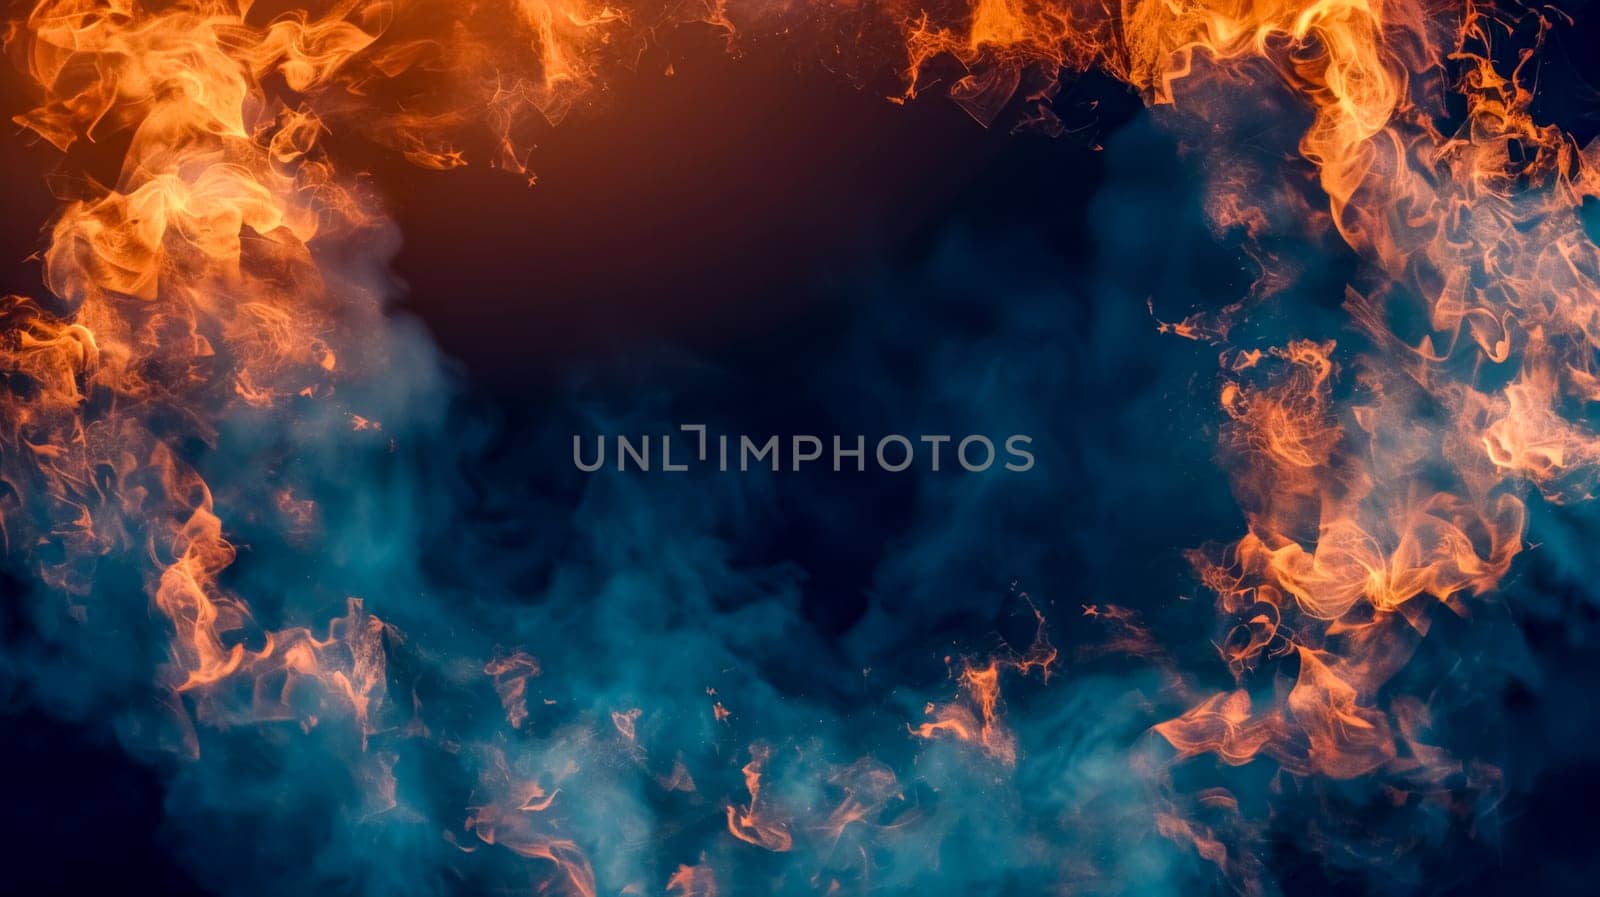 Fiery dance: abstract flame and smoke background by Edophoto